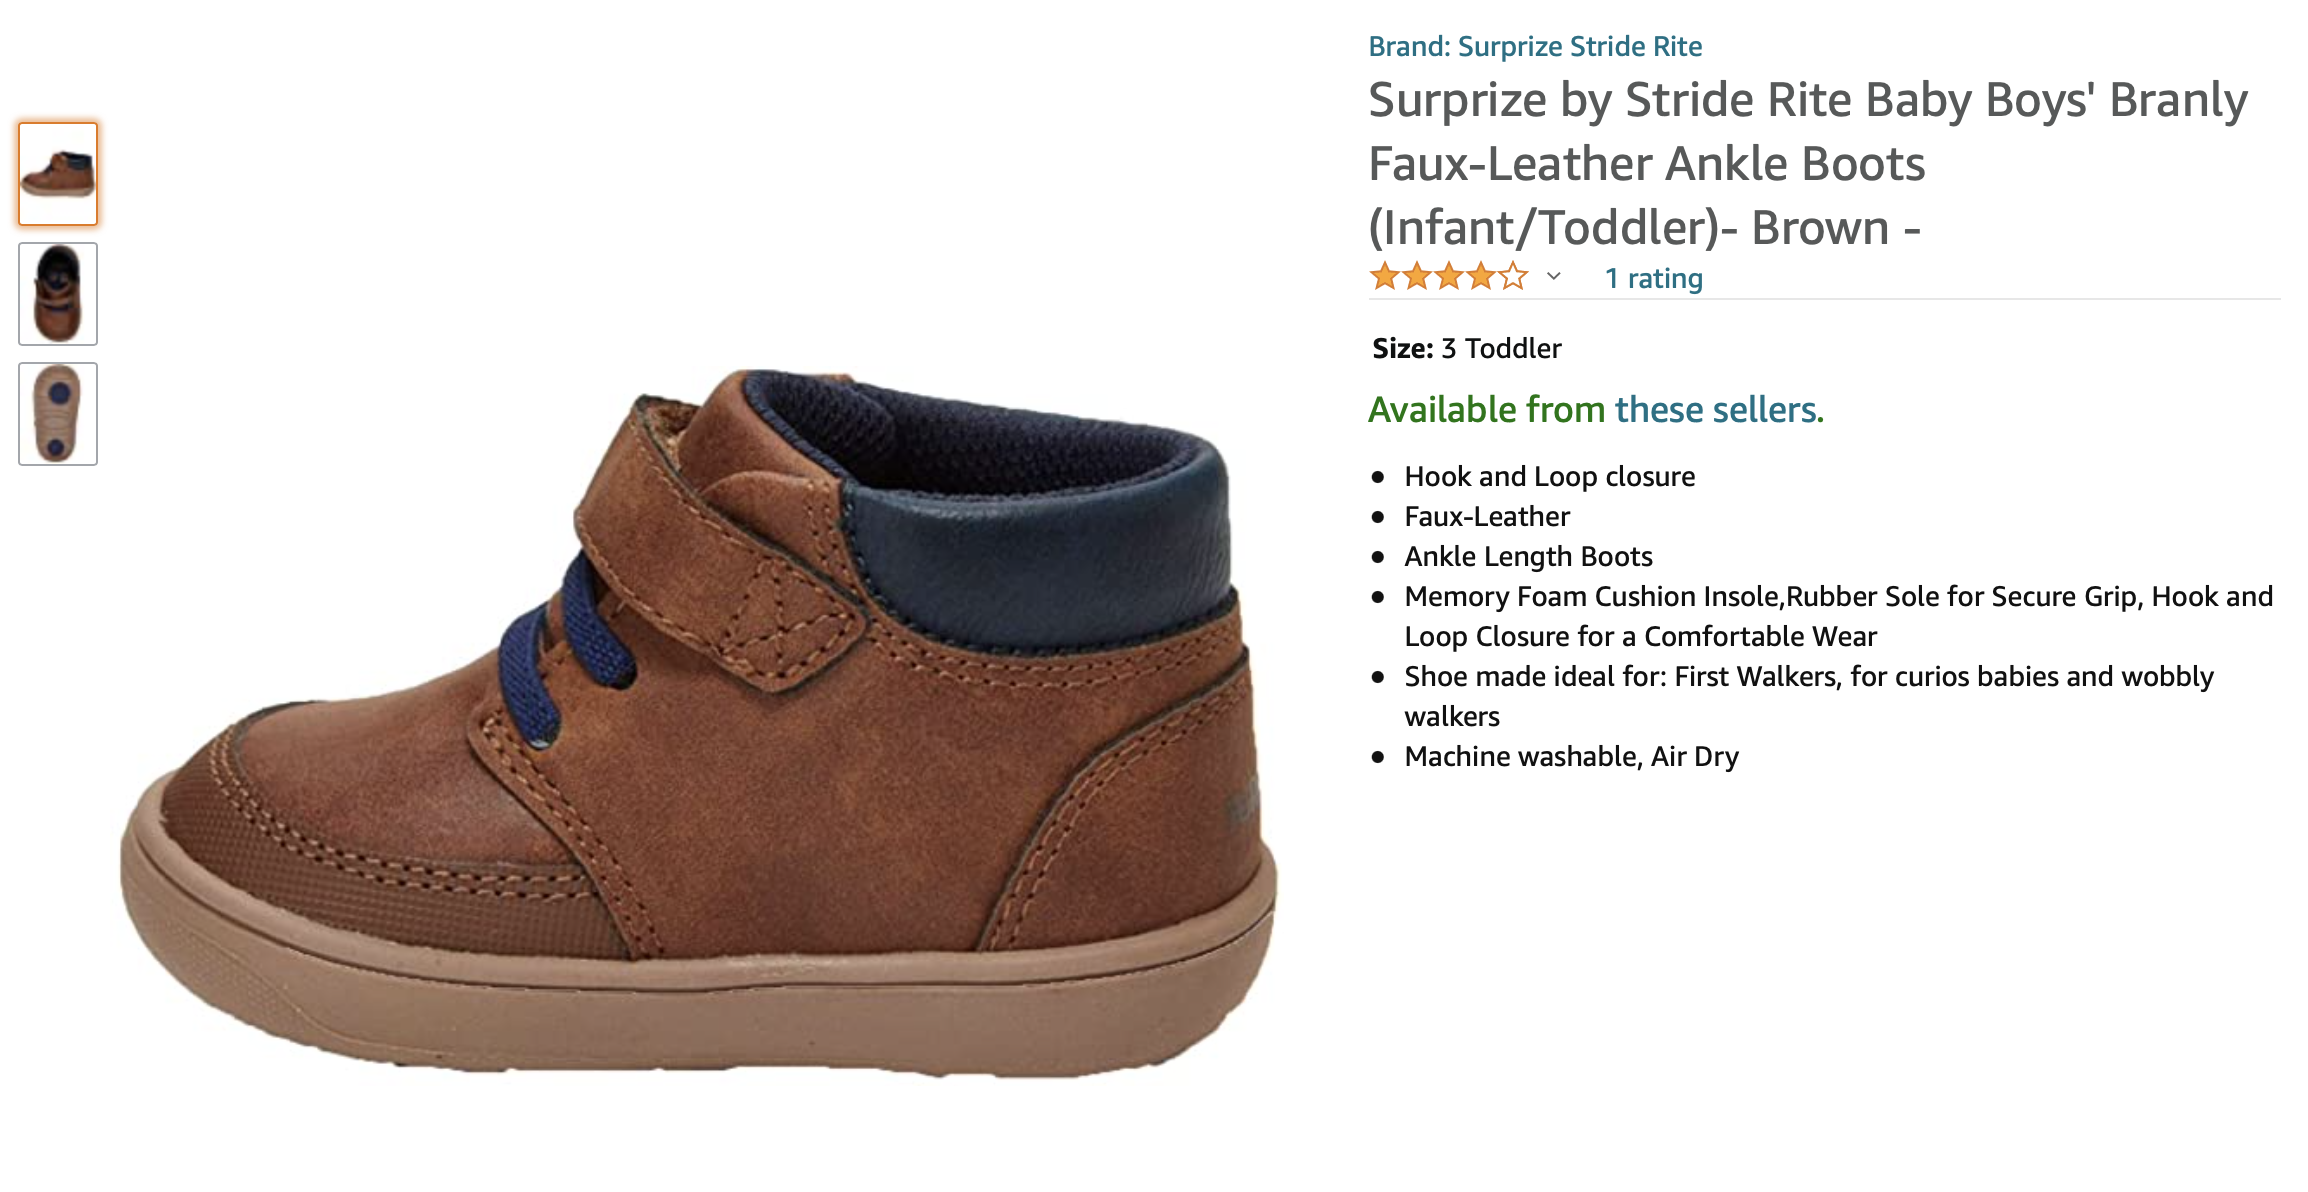 Surprize by Stride Rite Baby Boys Branly Faux-Leather Ankle Boots Infant/Toddler Brown